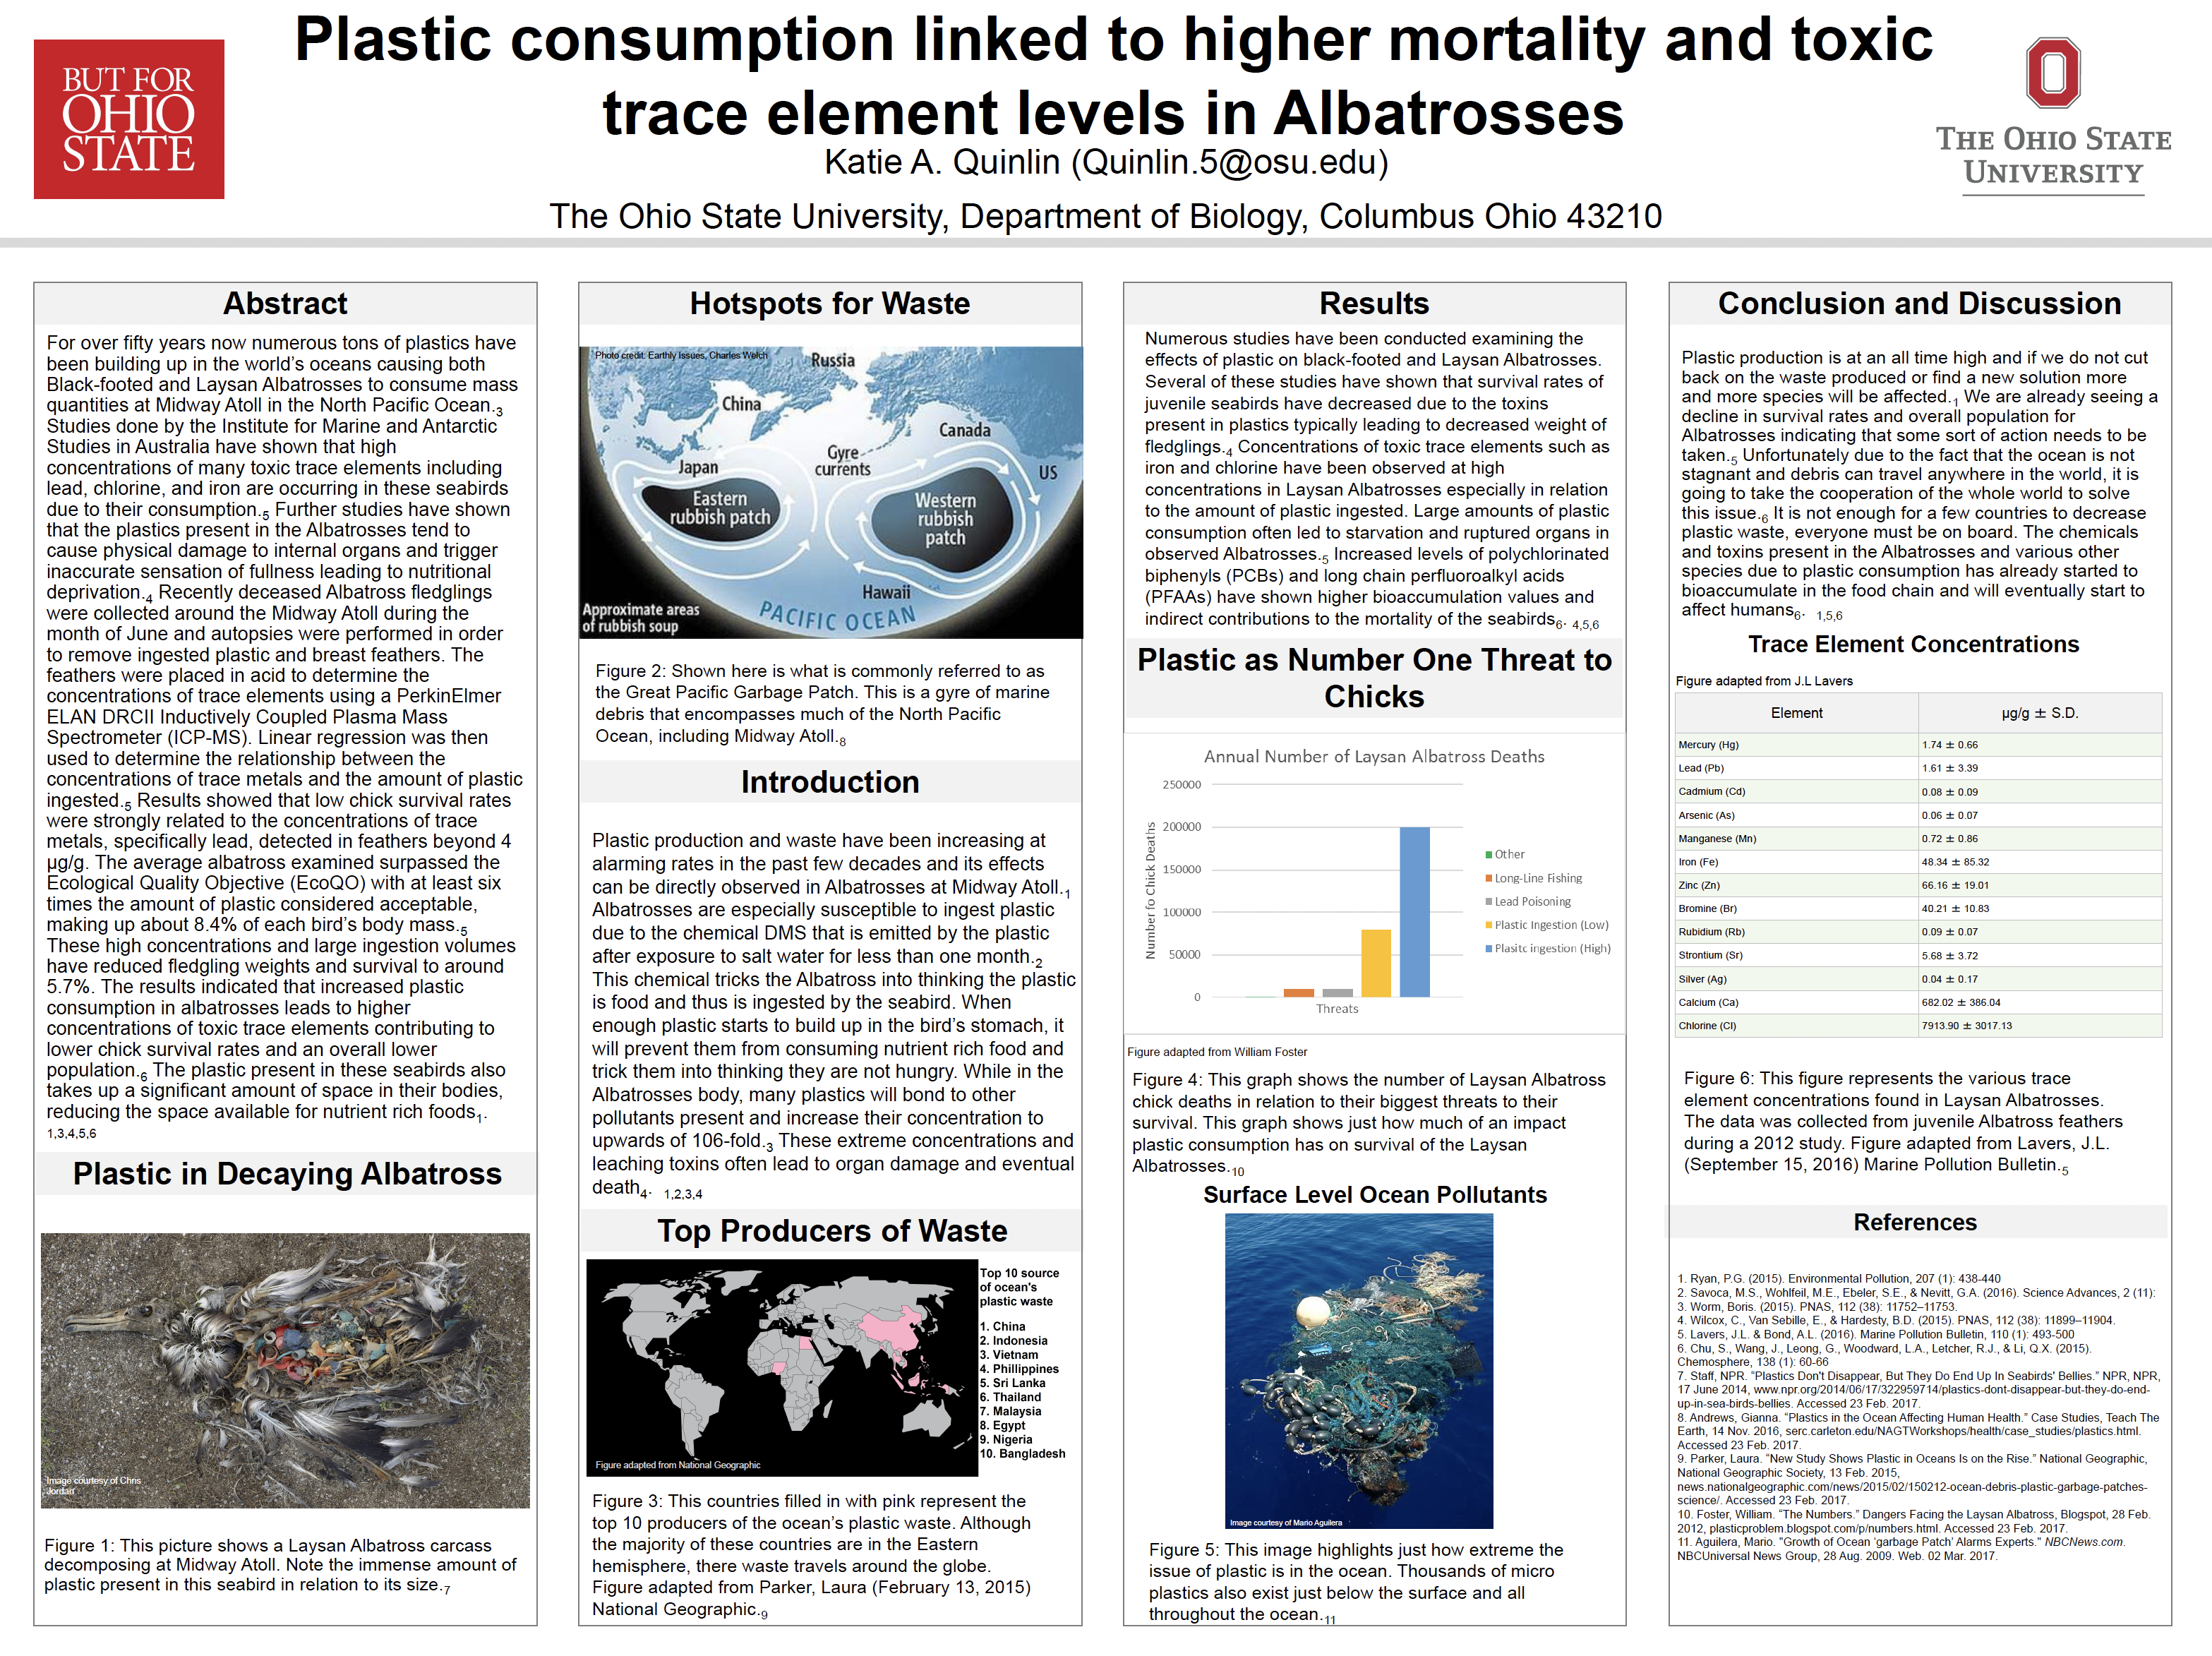 Student created poster entitled: Plastic consumption linked to higher mortality and toxic trace element levels in Albatrosses. Poster was created by Katie A. Quinlin, The Ohio State University, Department of Biology, Columbus Ohio, 43210.